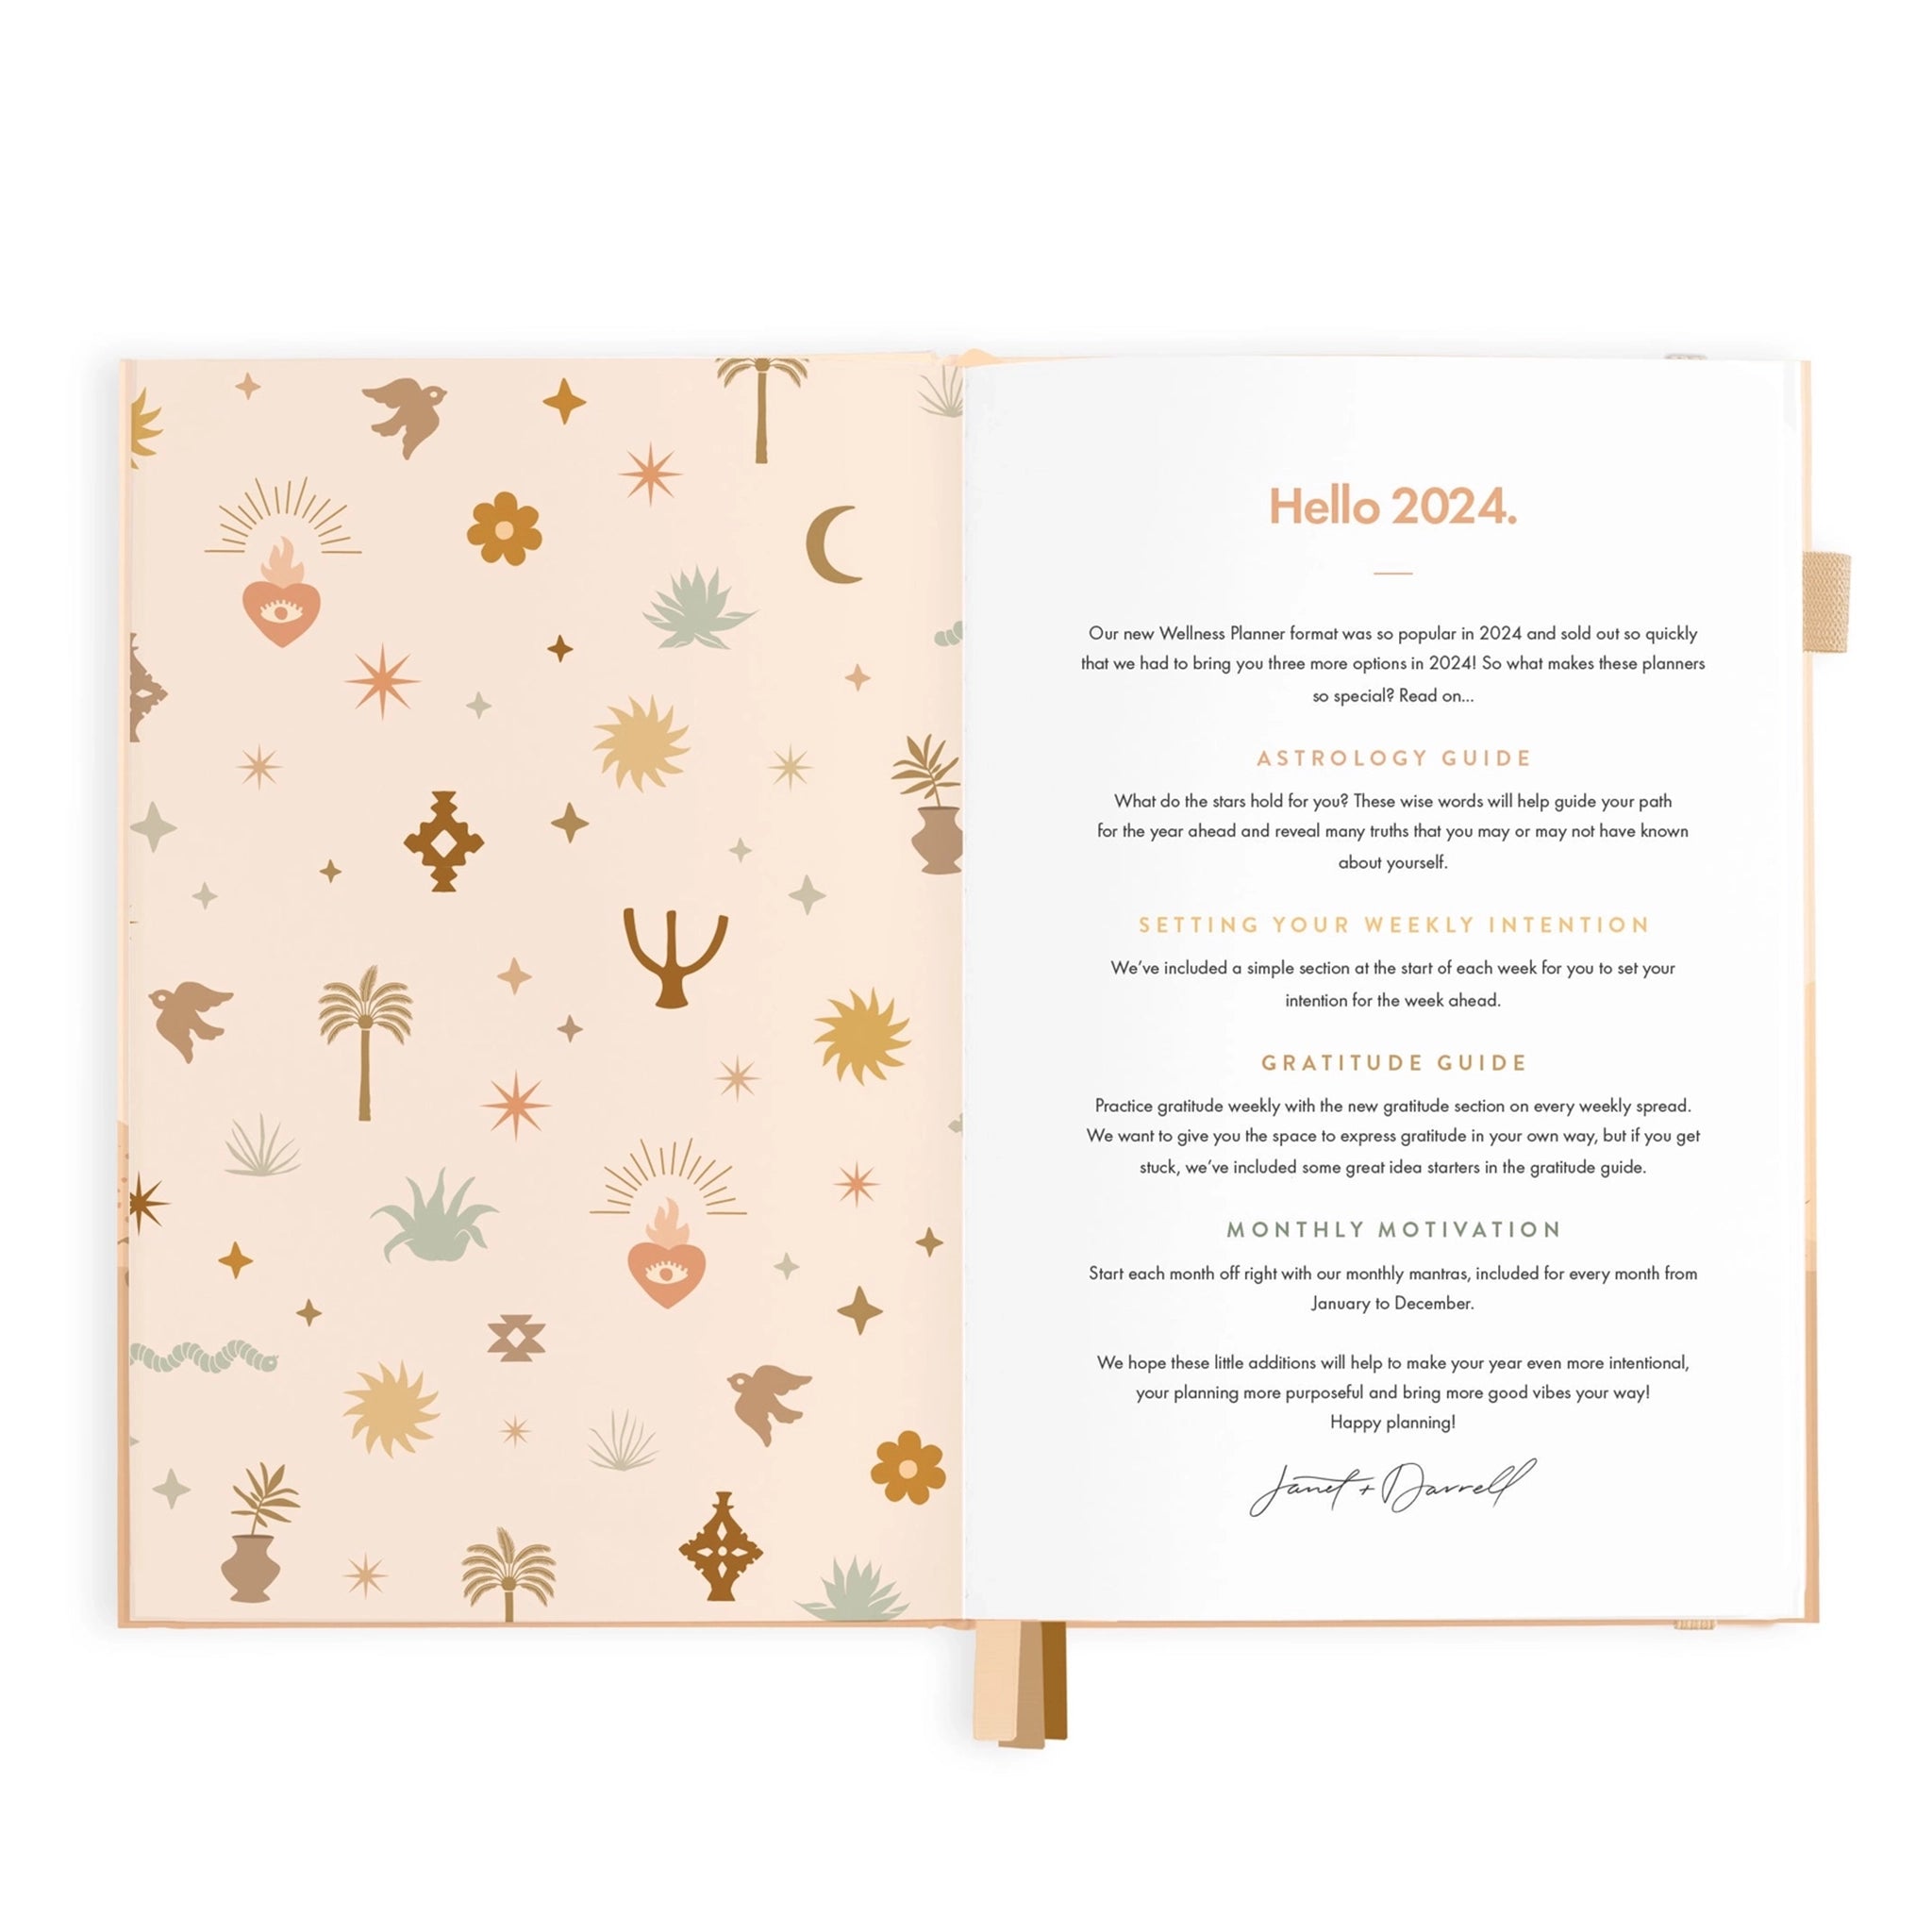 On a white background is the tan and peach planner opened to the front page that says, "Hello 2024" and what is included inside besides the planner which is an Astrology Guide, Setting a Weekly Intention, Gratitude Guide, and Monthly Motivation.